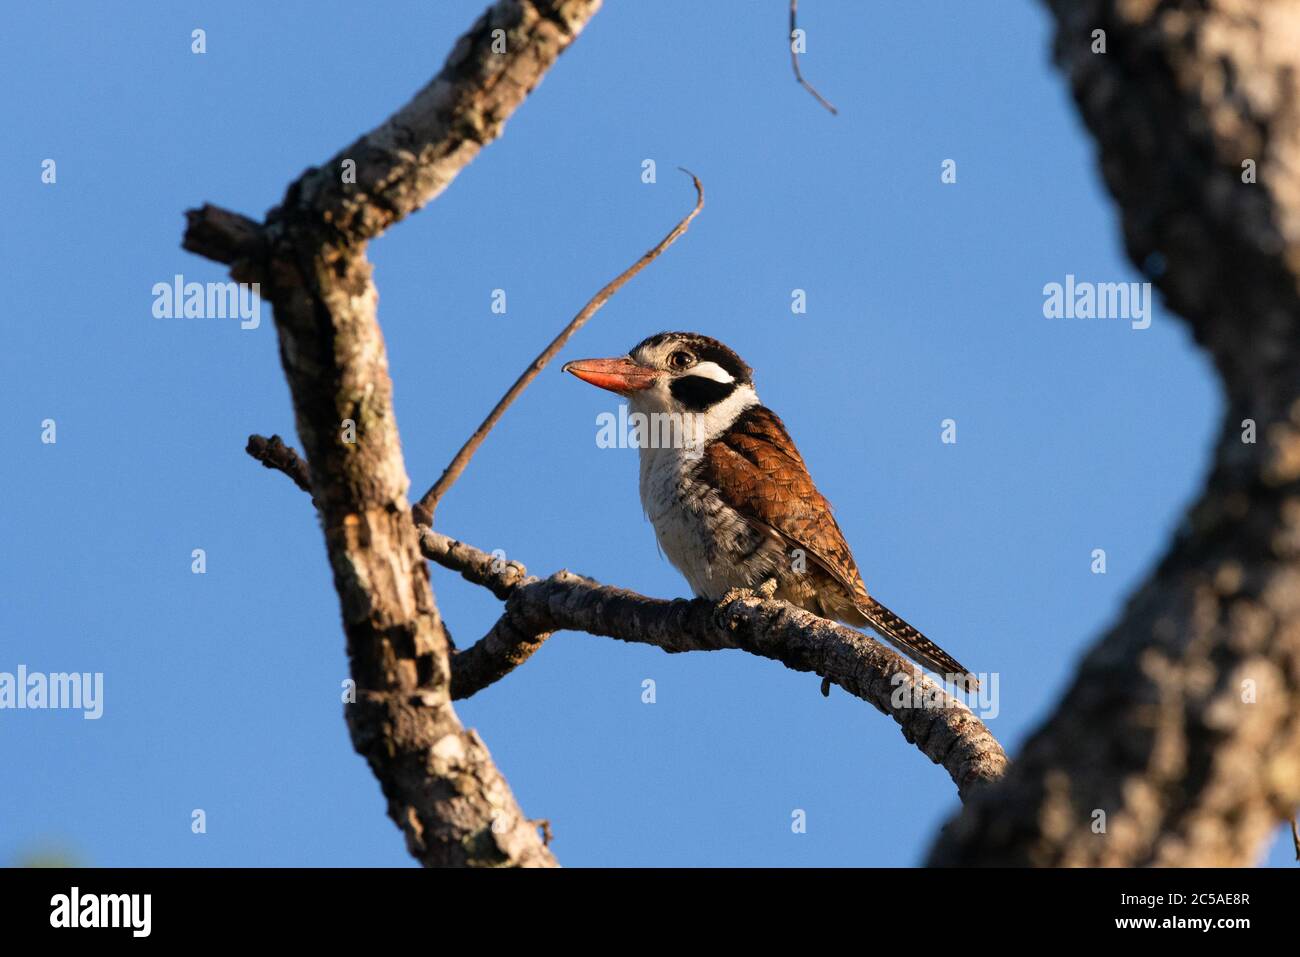 A White-eared Puffbird (Nystalus chacuru) from the Cerrado of Central Brazil Stock Photo